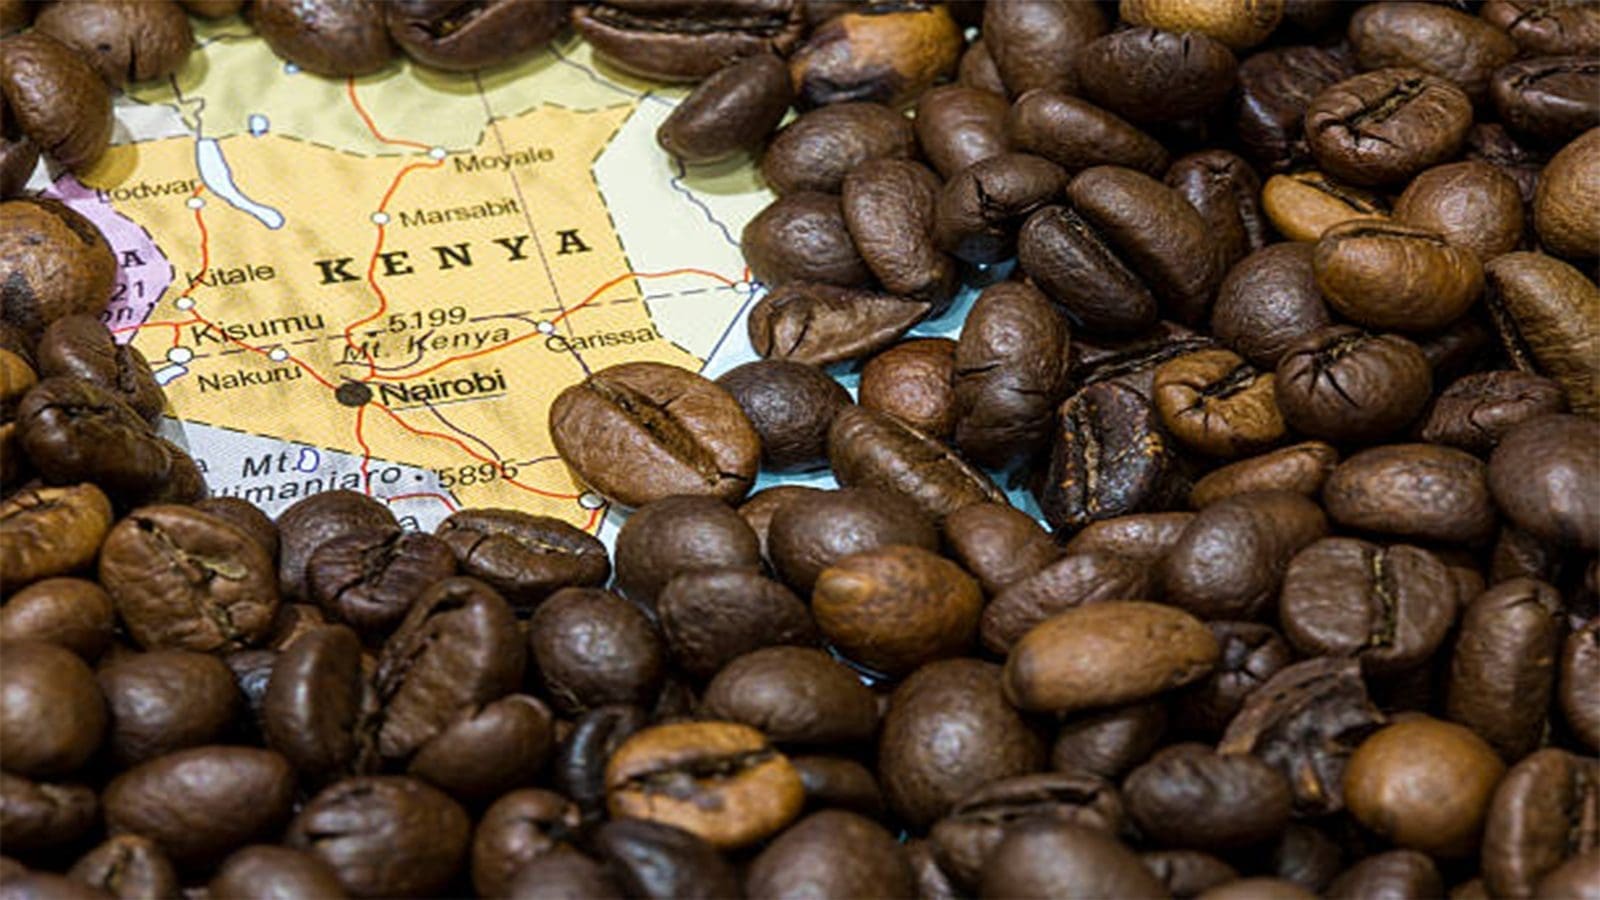 Plot twist as Germany exonerates Kenyan coffee previously flagged in Japan